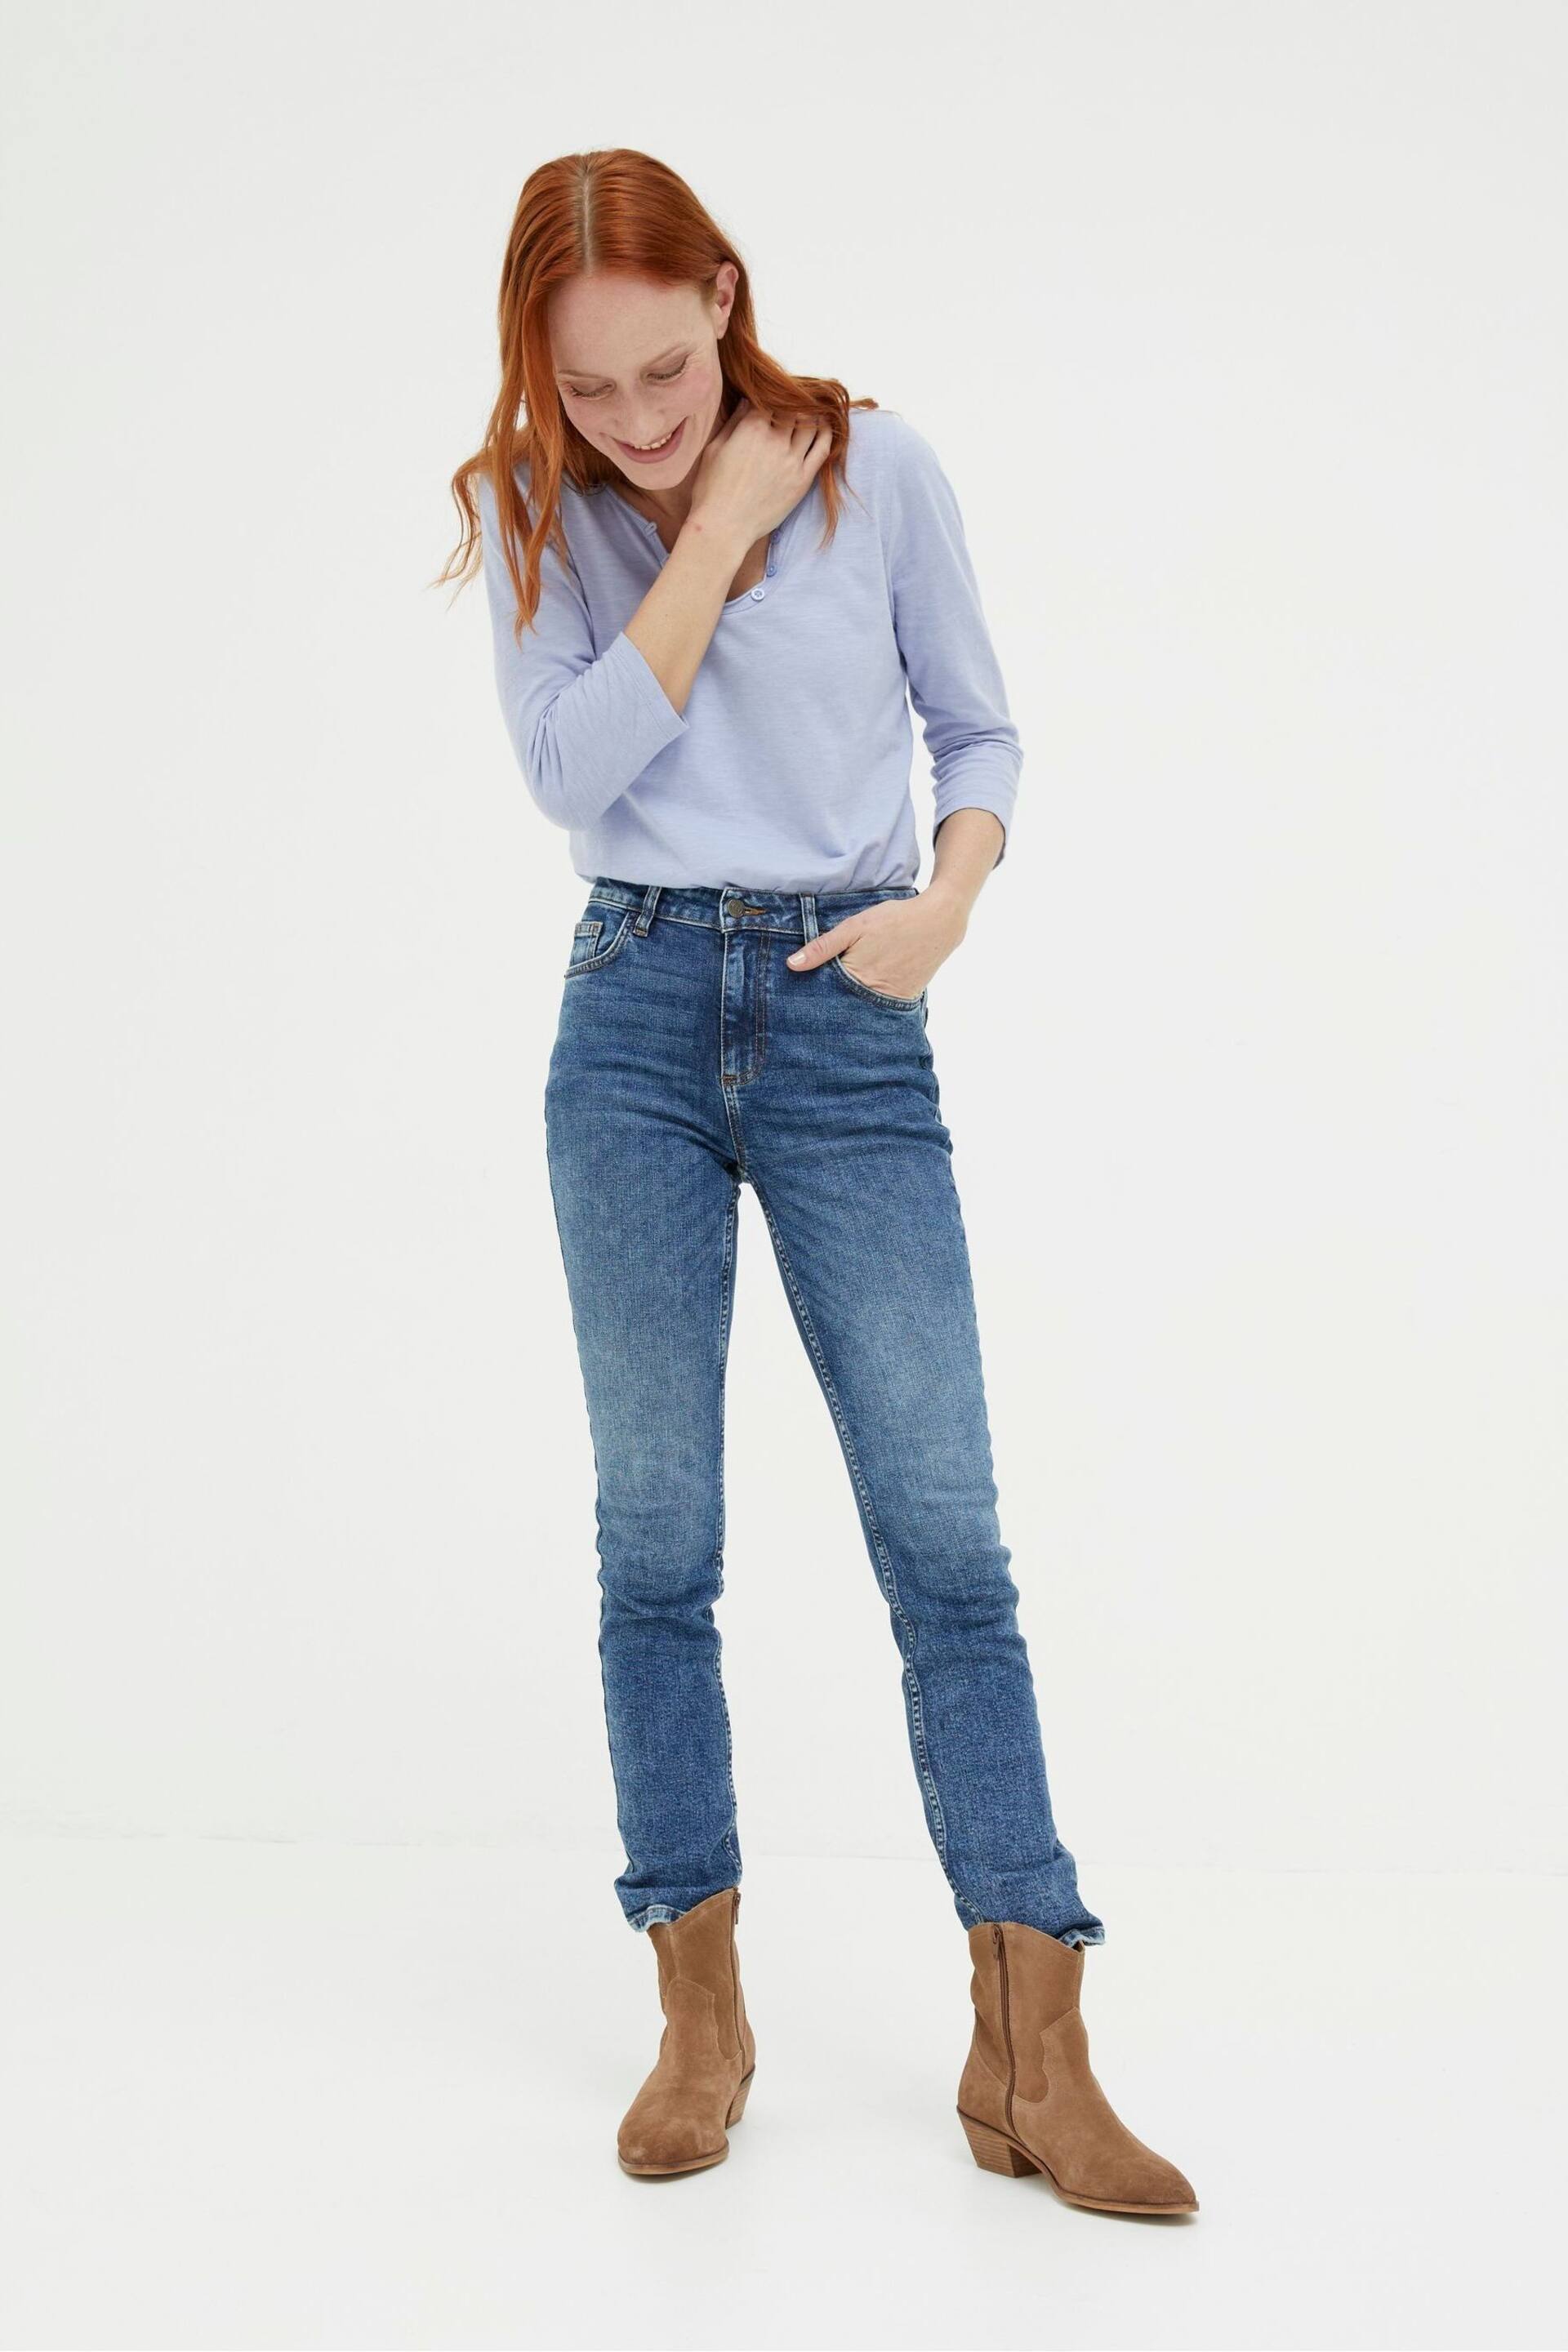 FatFace Blue Sway Slim Jeans - Image 4 of 5